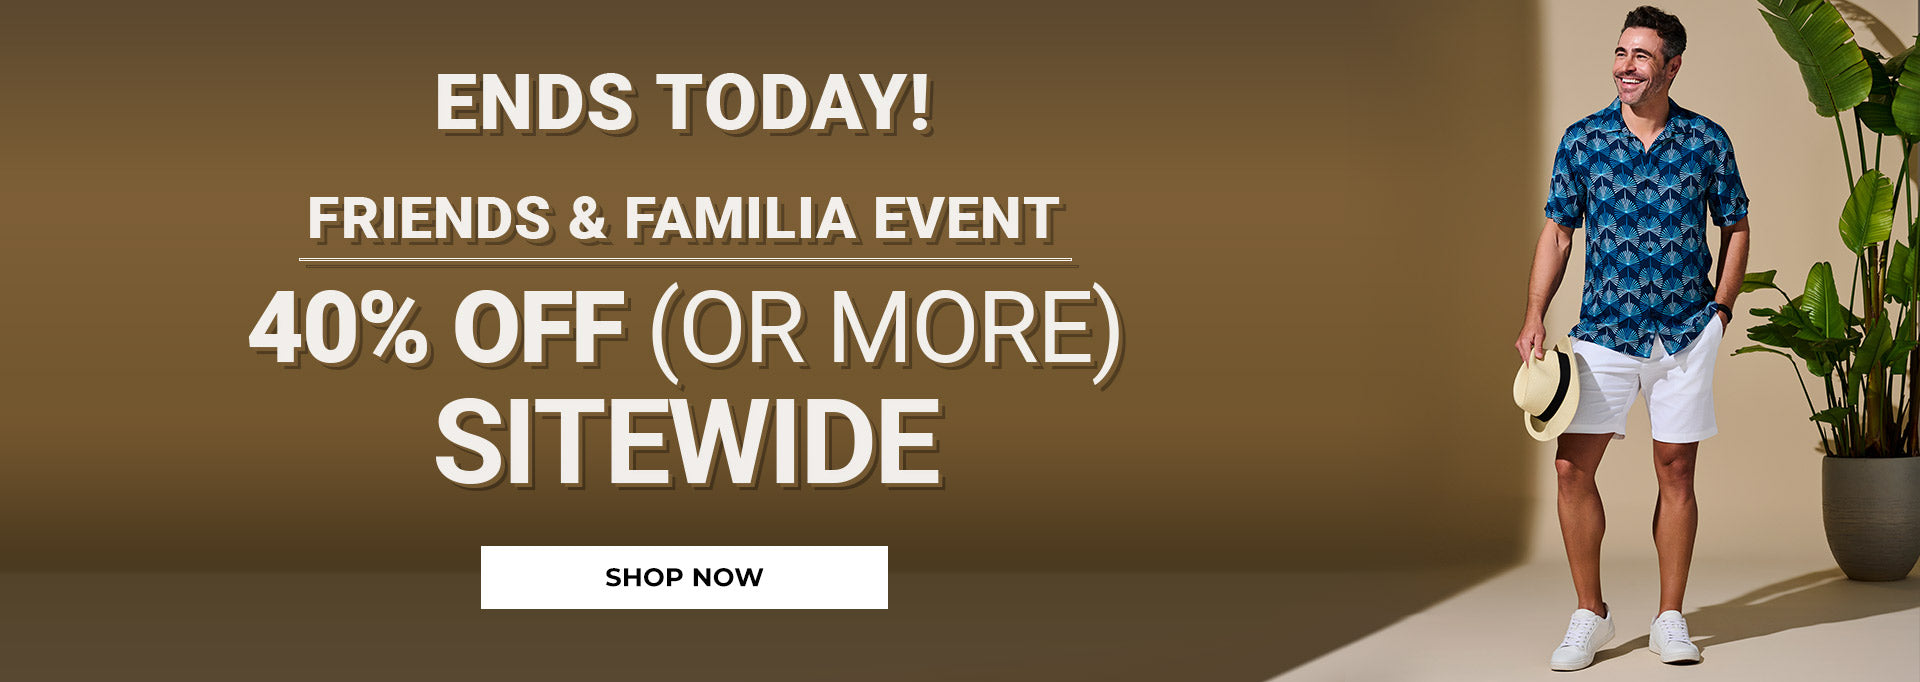 Friends and Familia Event: 40% Or More Off Sitewide - Shop Now